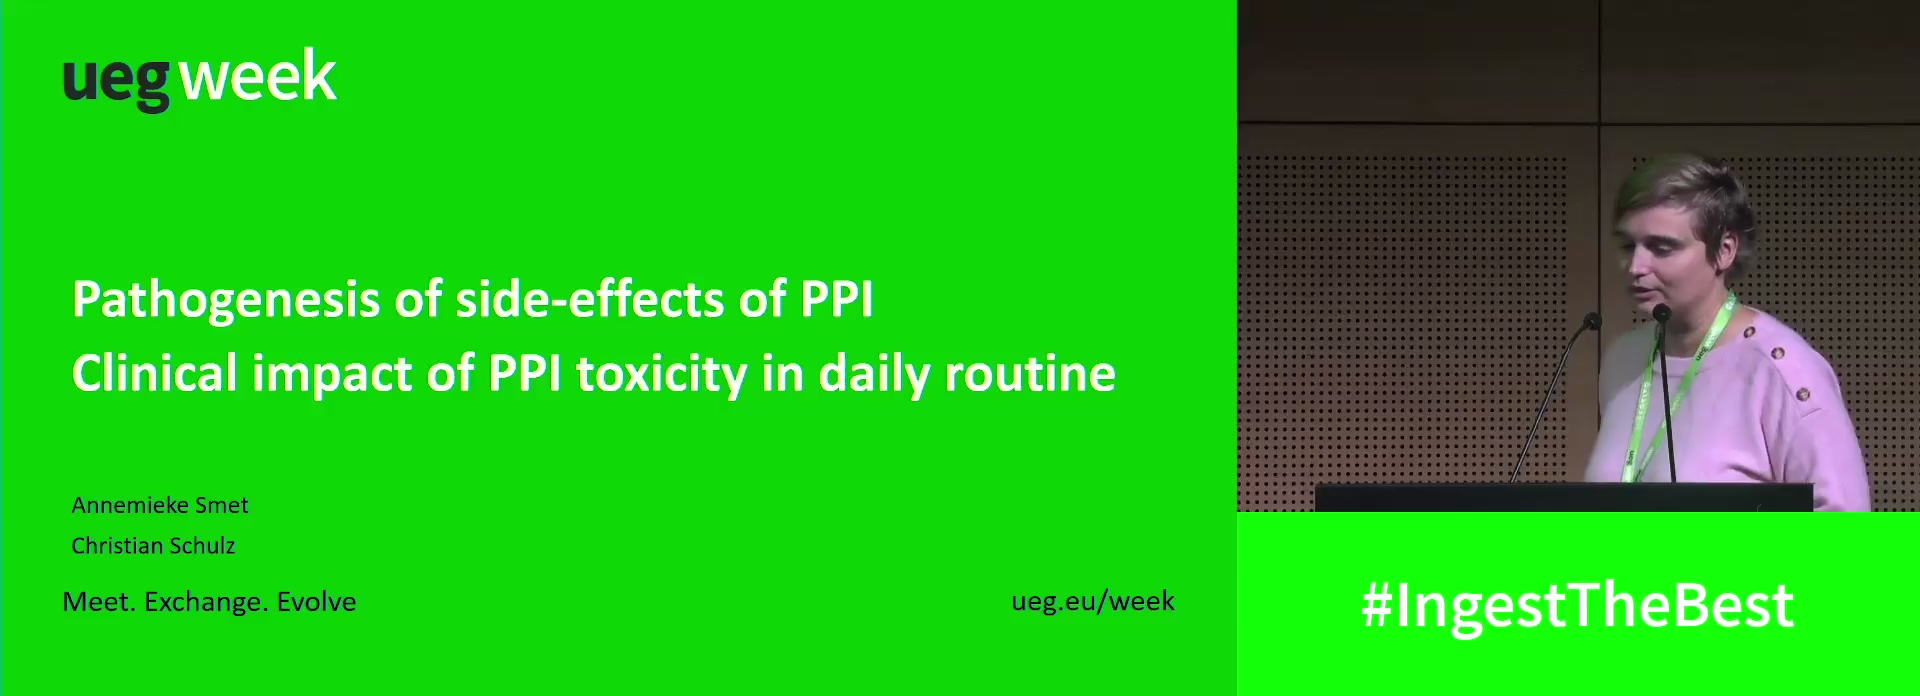 Pathogenesis of side-effects of PPI / Clinical impact of PPI toxicity in daily routine